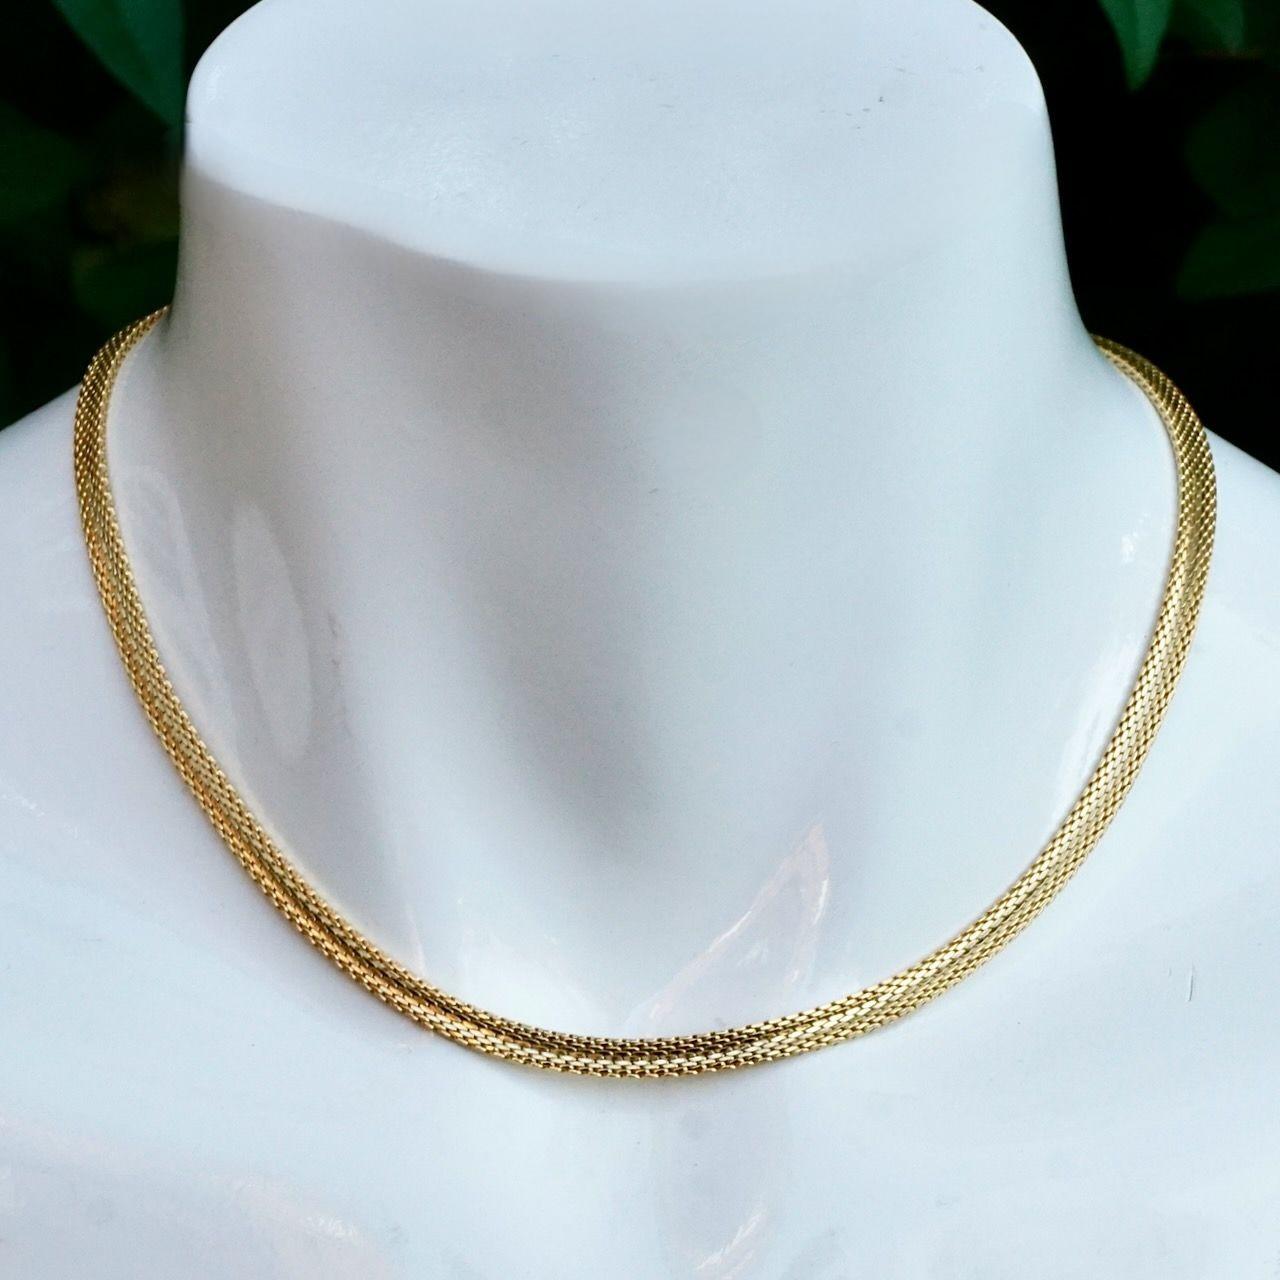 Gold Plated Egyptian Revival Textured and Shiny Mesh Collar Necklace circa 1980s 1